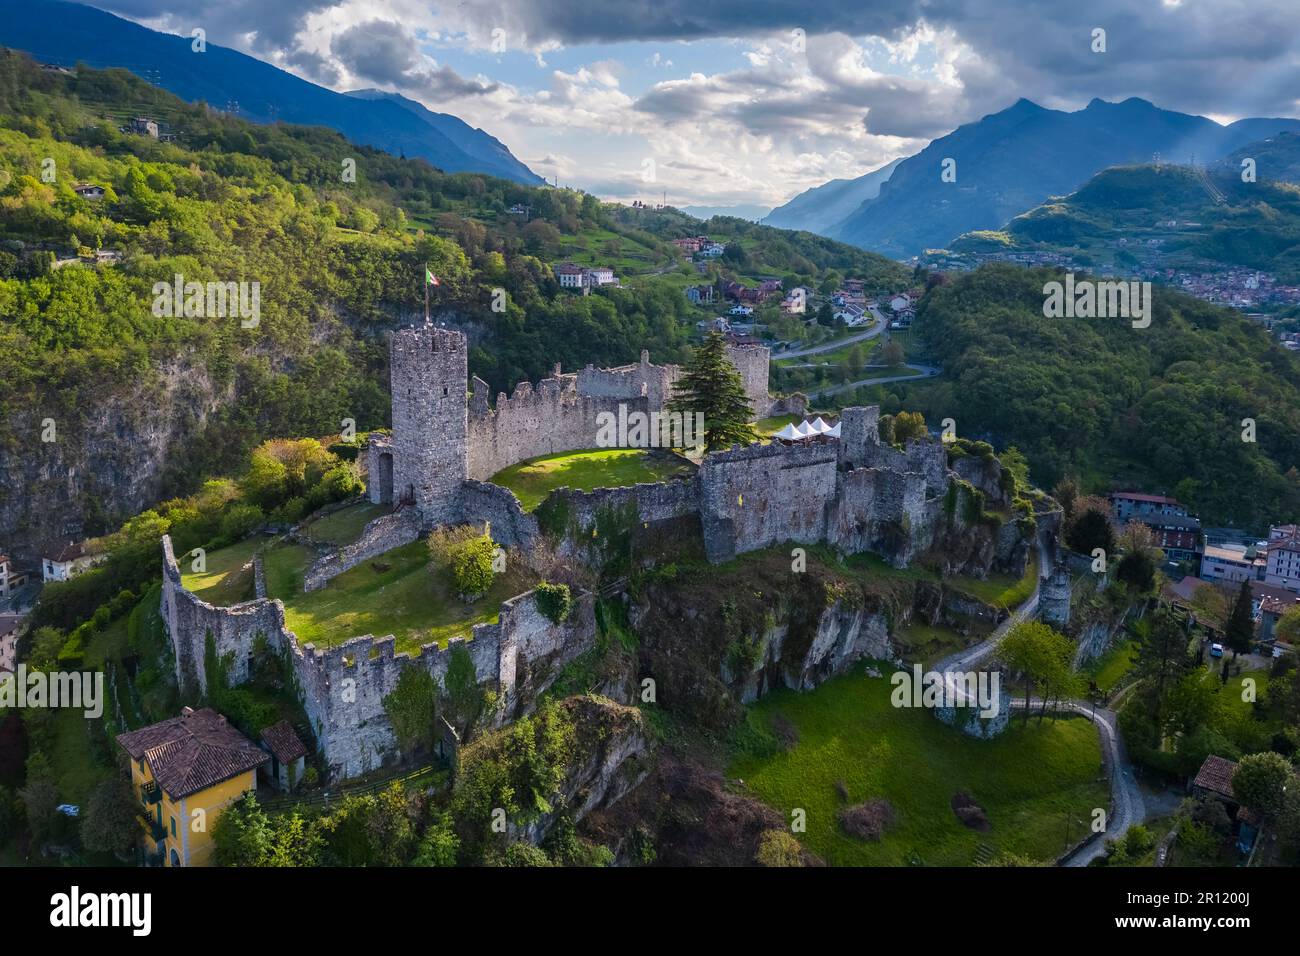 Aerial view of the ancient ruins of the castle of Breno. Brescia province, Valcamonica valley, Lombardy, Italy, Europe. Stock Photo